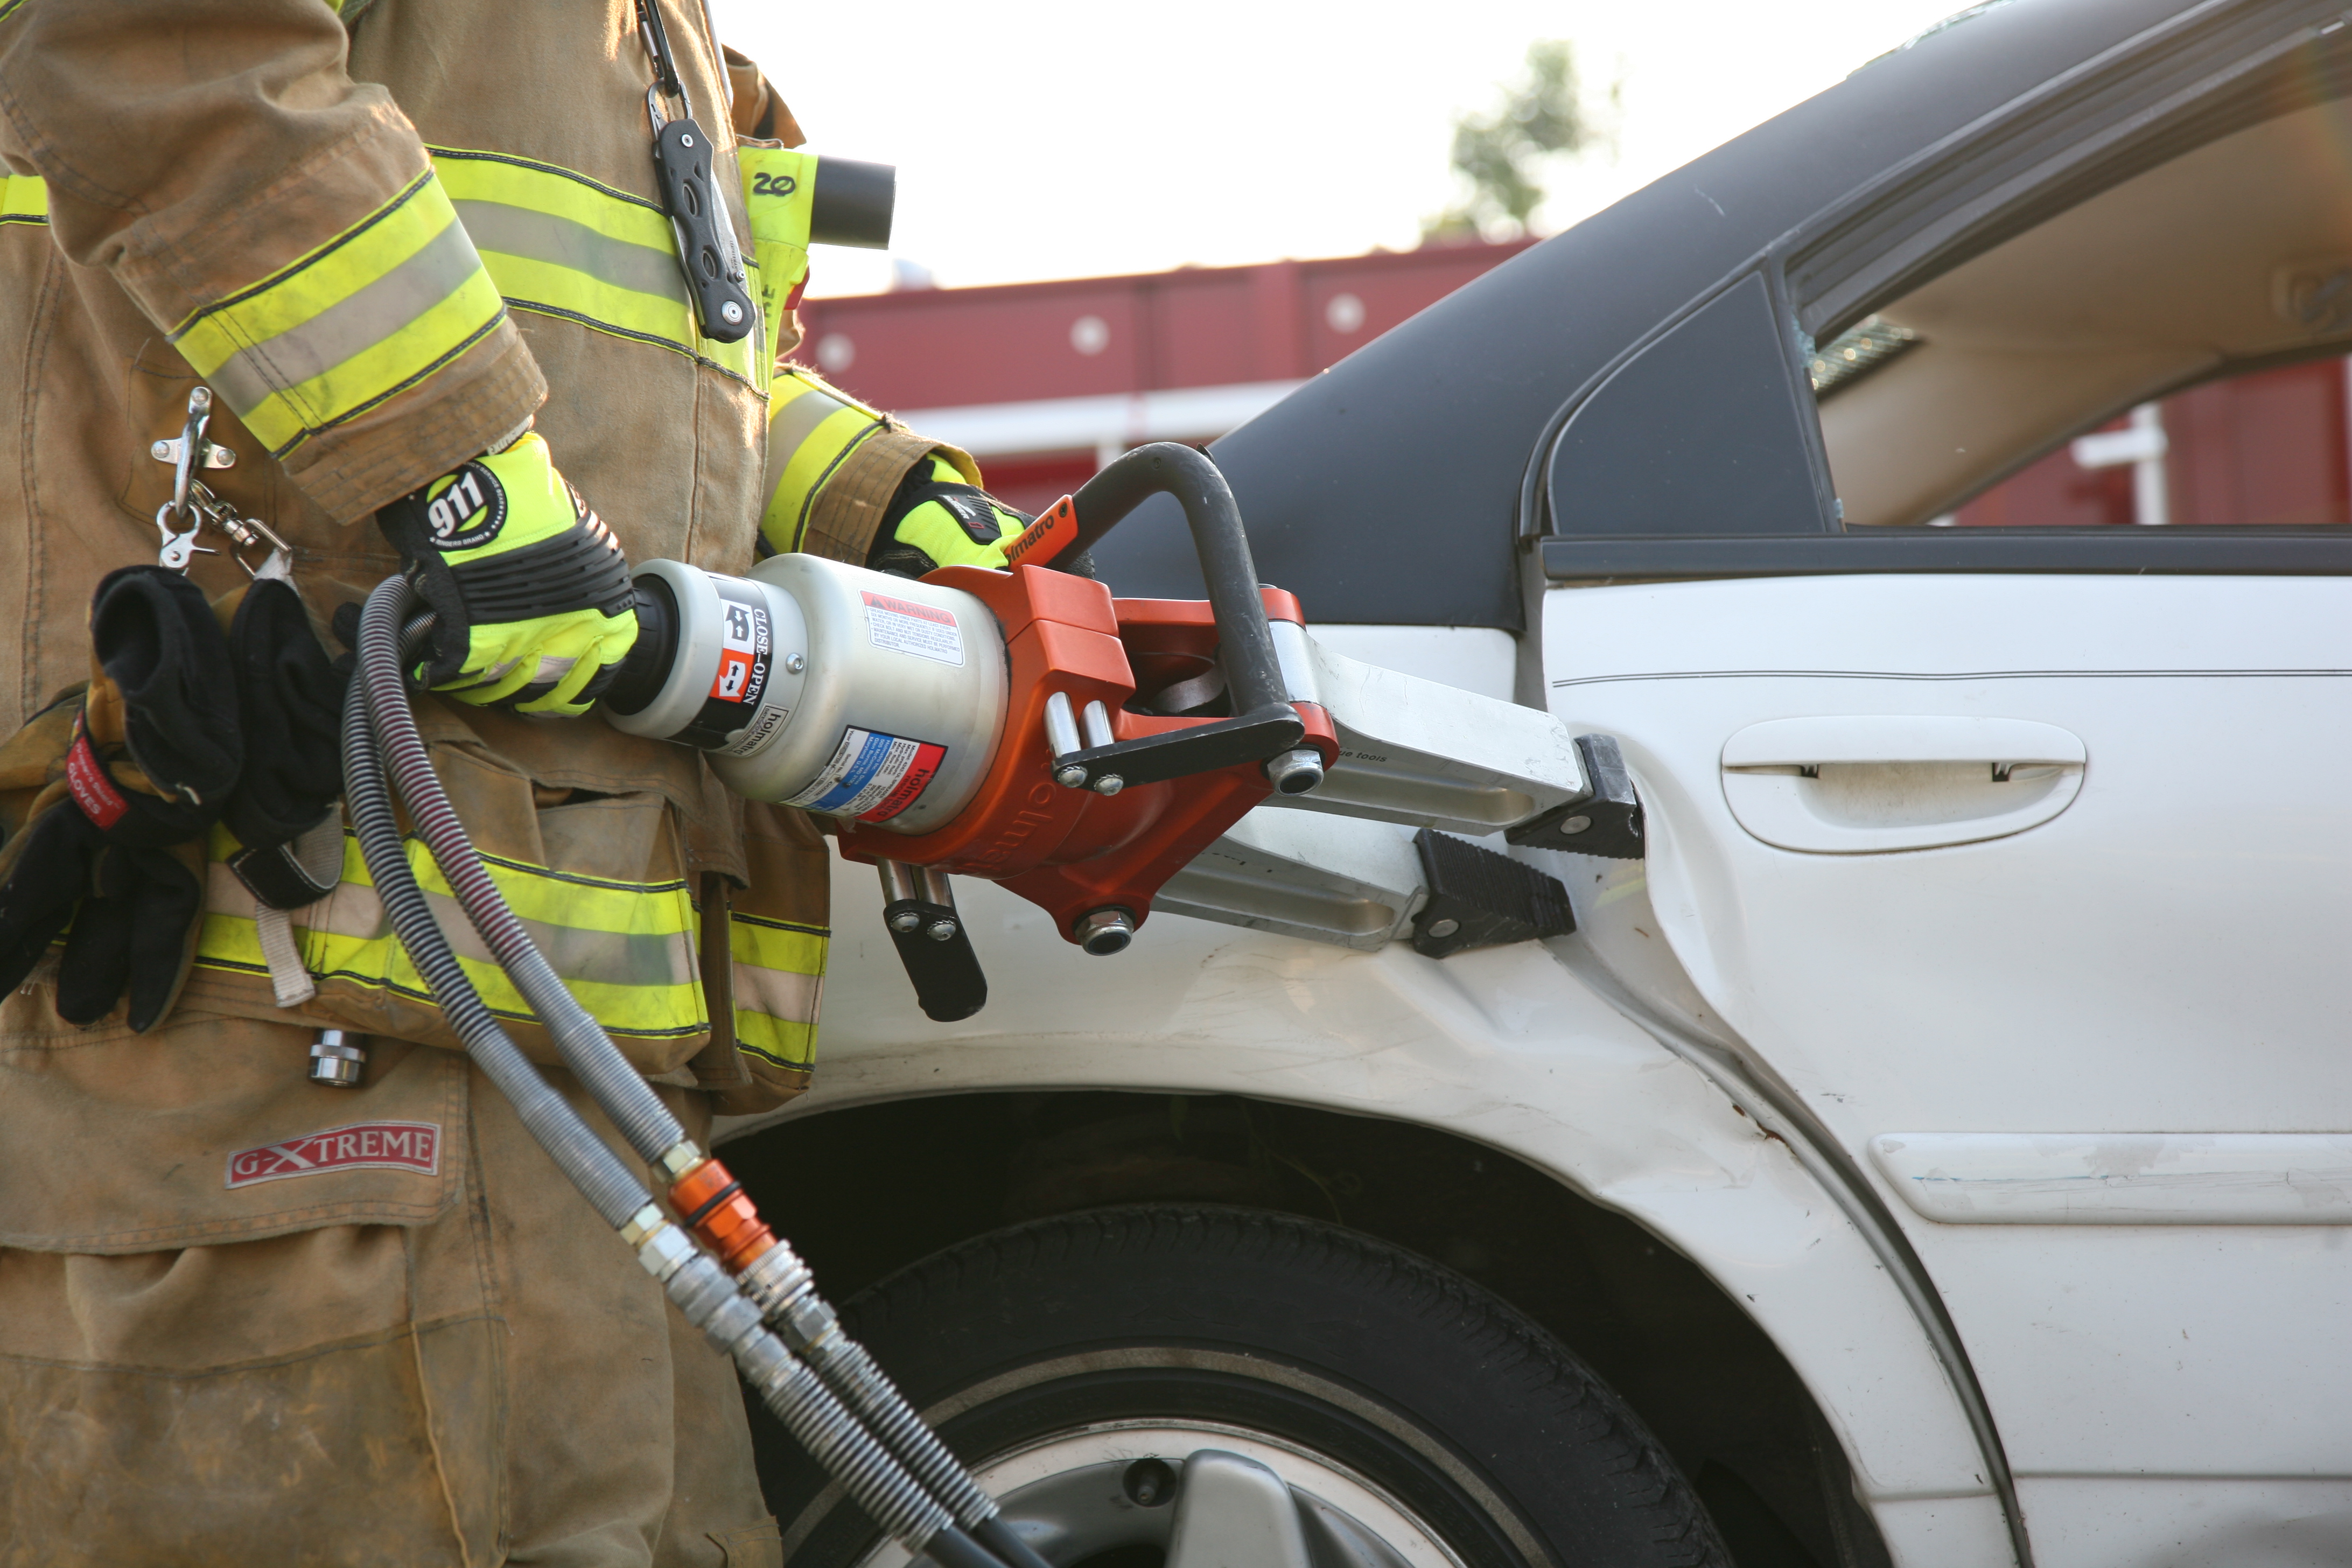 Hydraulic spreaders, commonly referred to as the "Jaws of Life", being used to open a car door